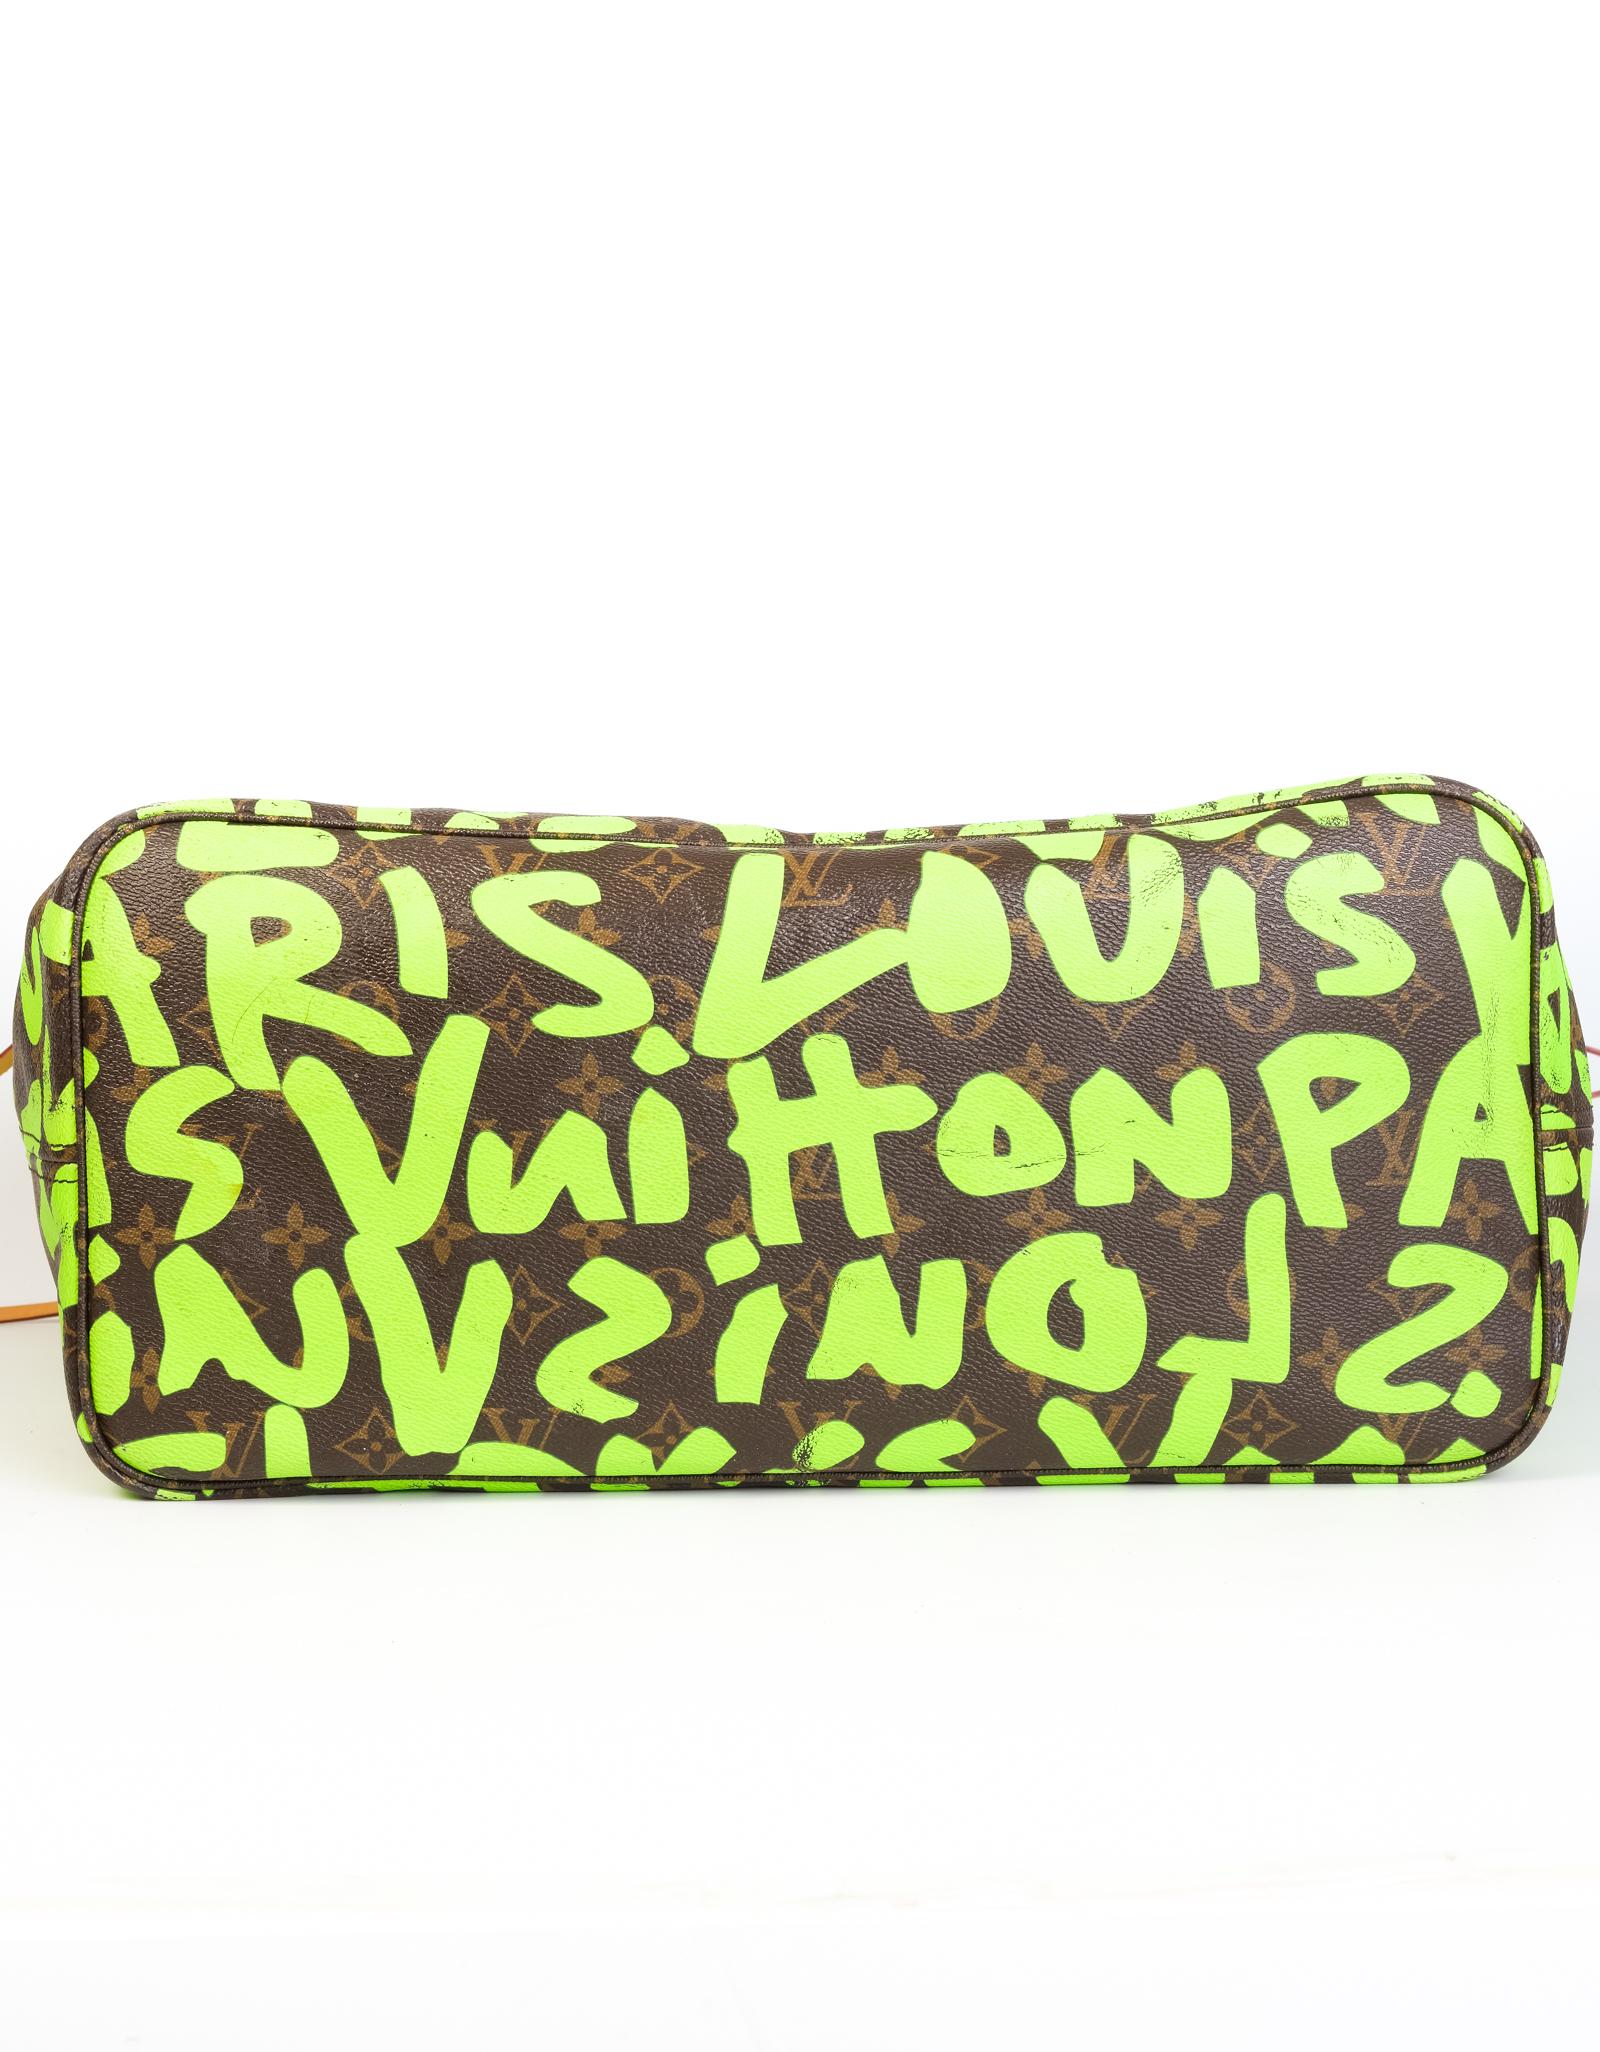 Green Louis Vuitton Stephen Sprouse Limited Edition Monogram Graffiti Newfull GM Tote 